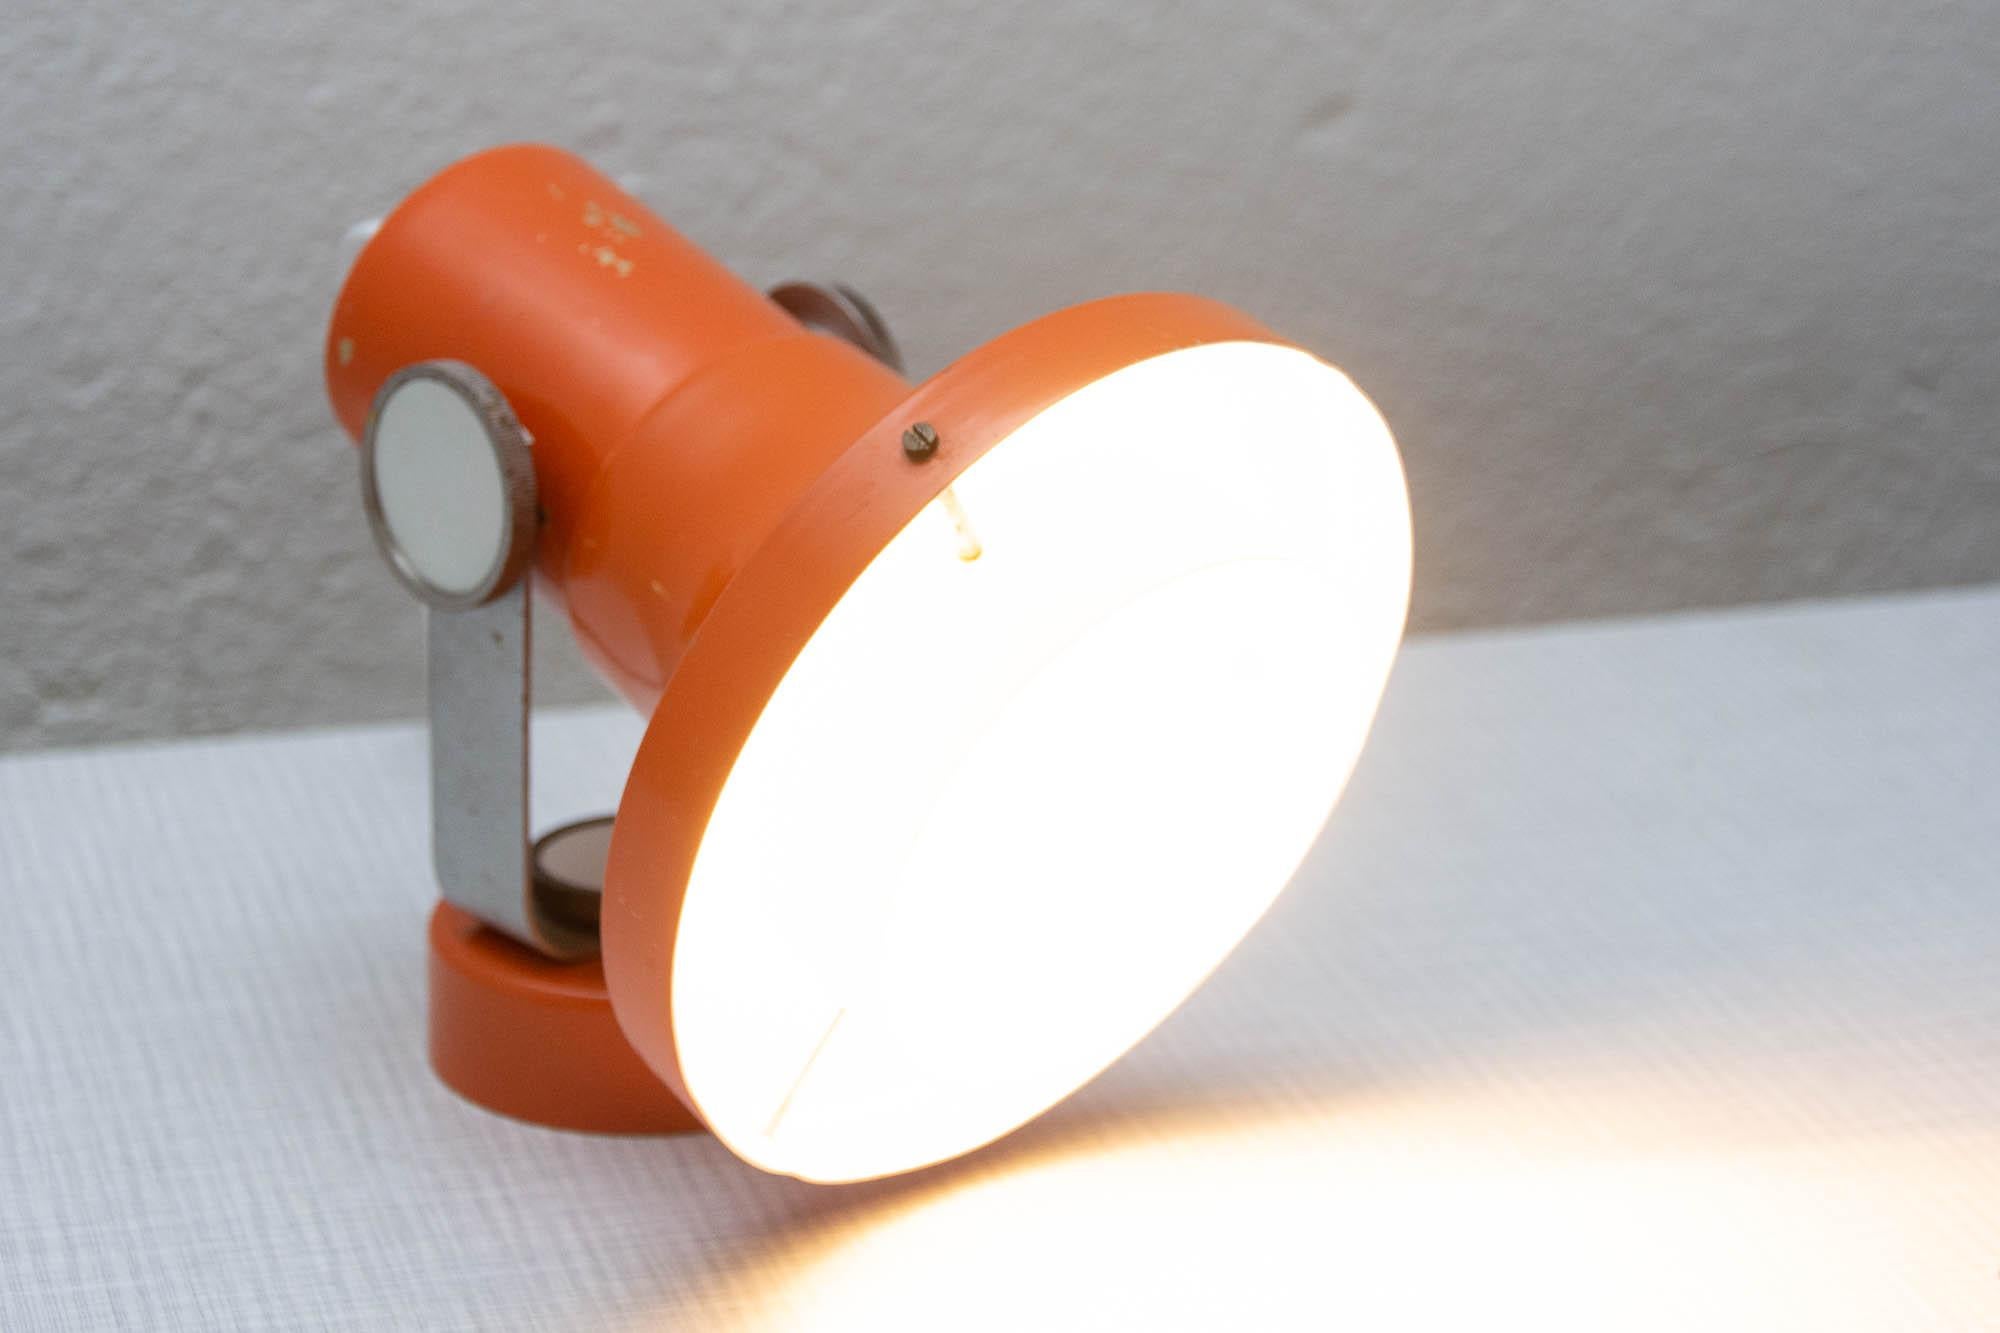 This table lamp or spot light was designed by the Czech architect Pavel Grus for Kamenicky Senov company in the 1960s. The inclination of the head are adjustable. This metal lamp is painted in orange is in good vintage condition with slight marks of